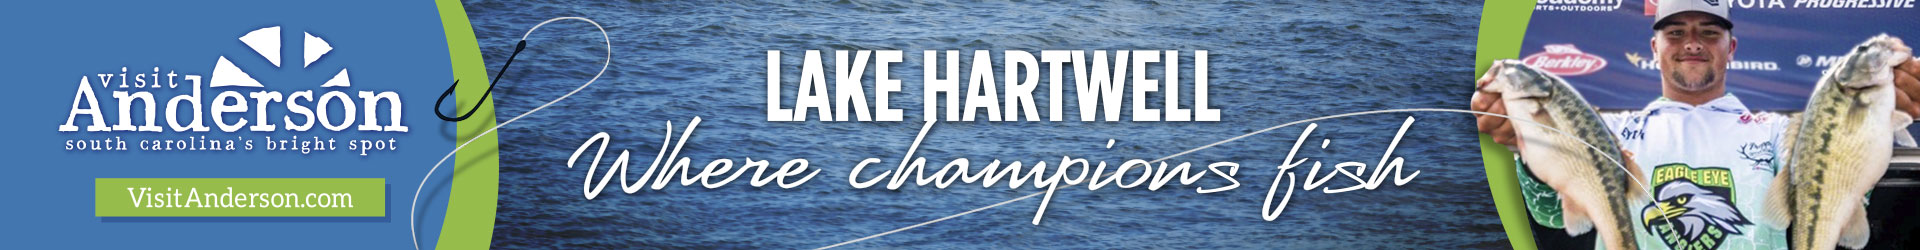 Order New Jerseys for a New School Year - Collegiate Bass Championship